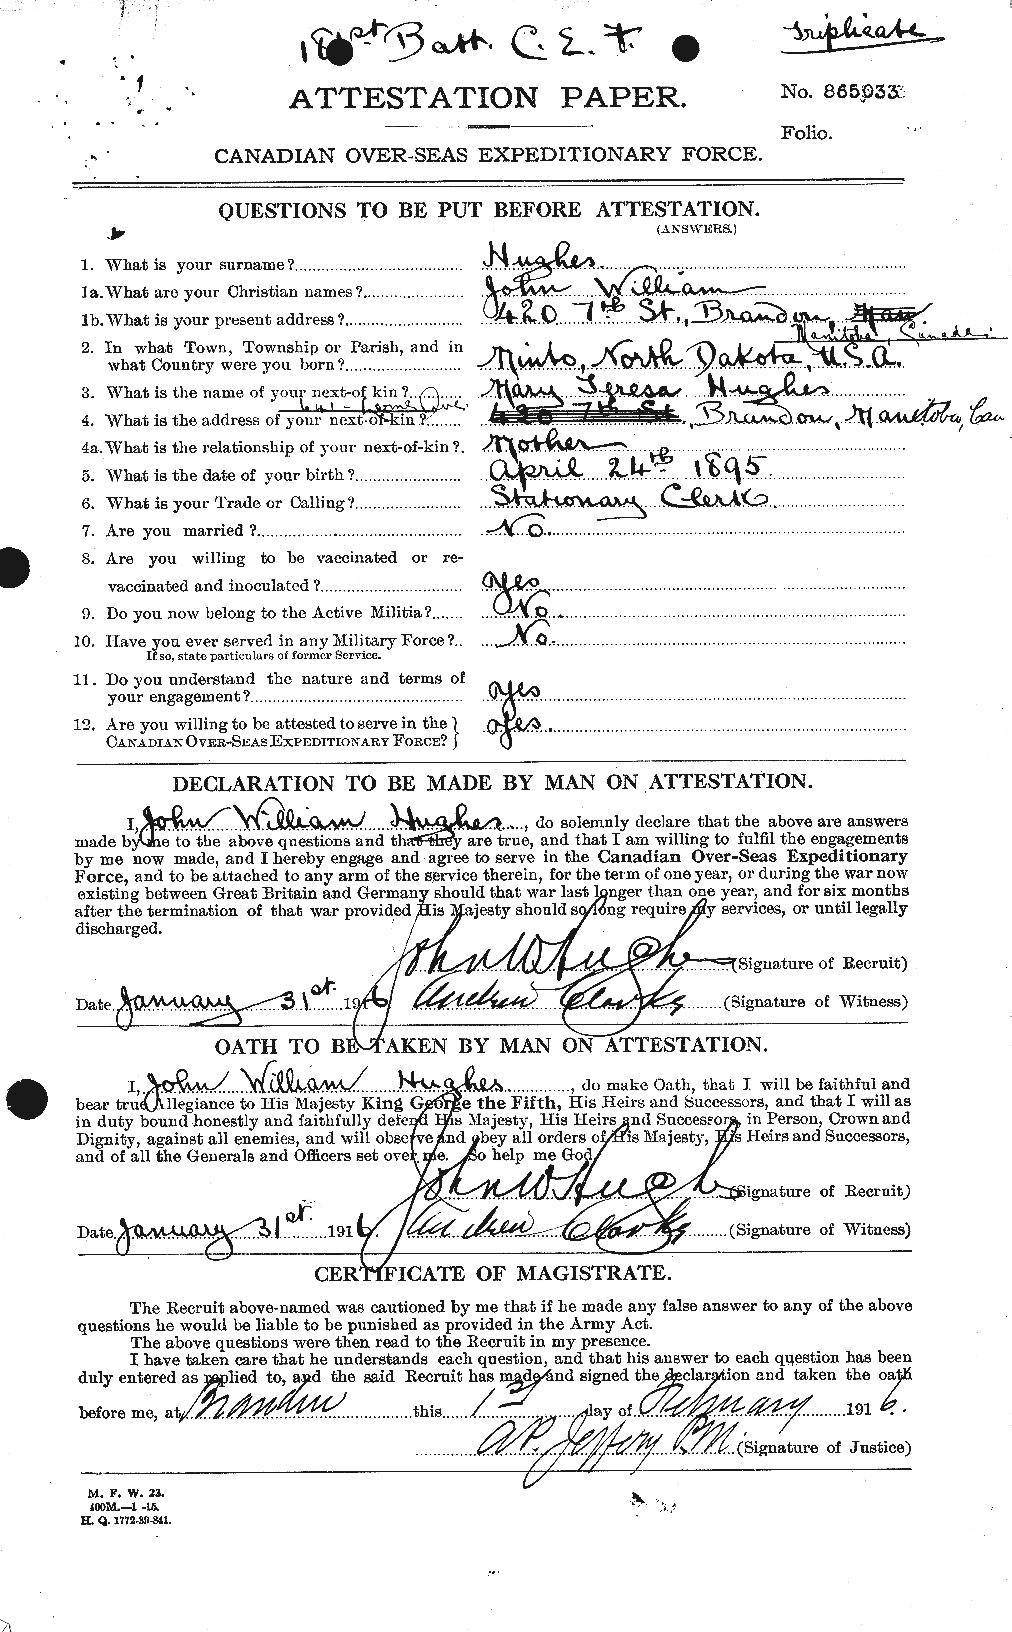 Personnel Records of the First World War - CEF 404060a